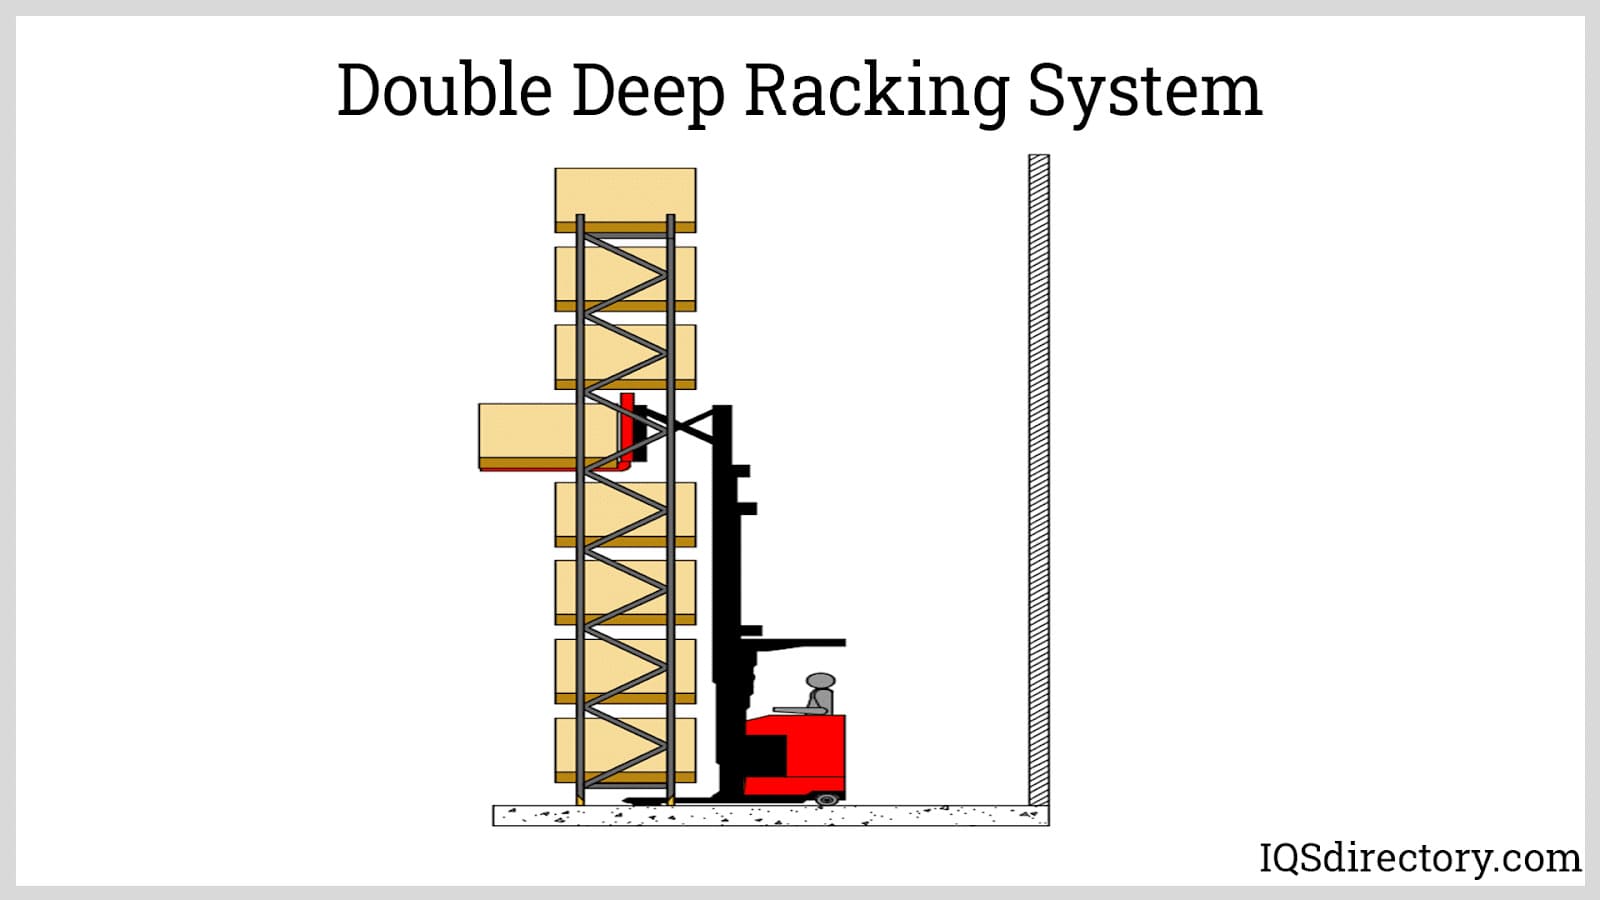 Double Deep Racking System